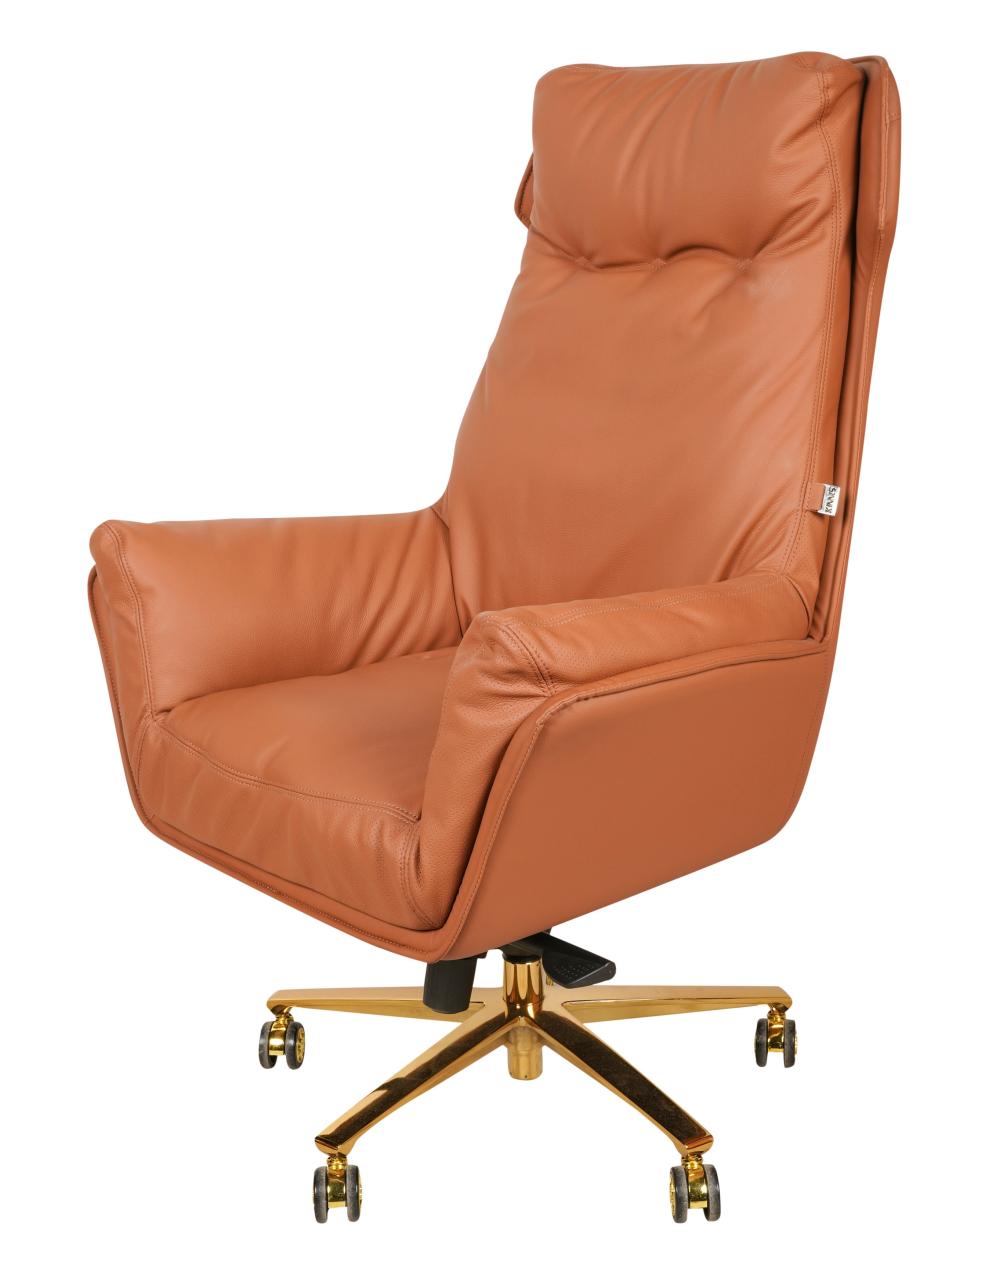 BROWN LEATHER SWIVEL OFFICE CHAIRBrown 303fb1